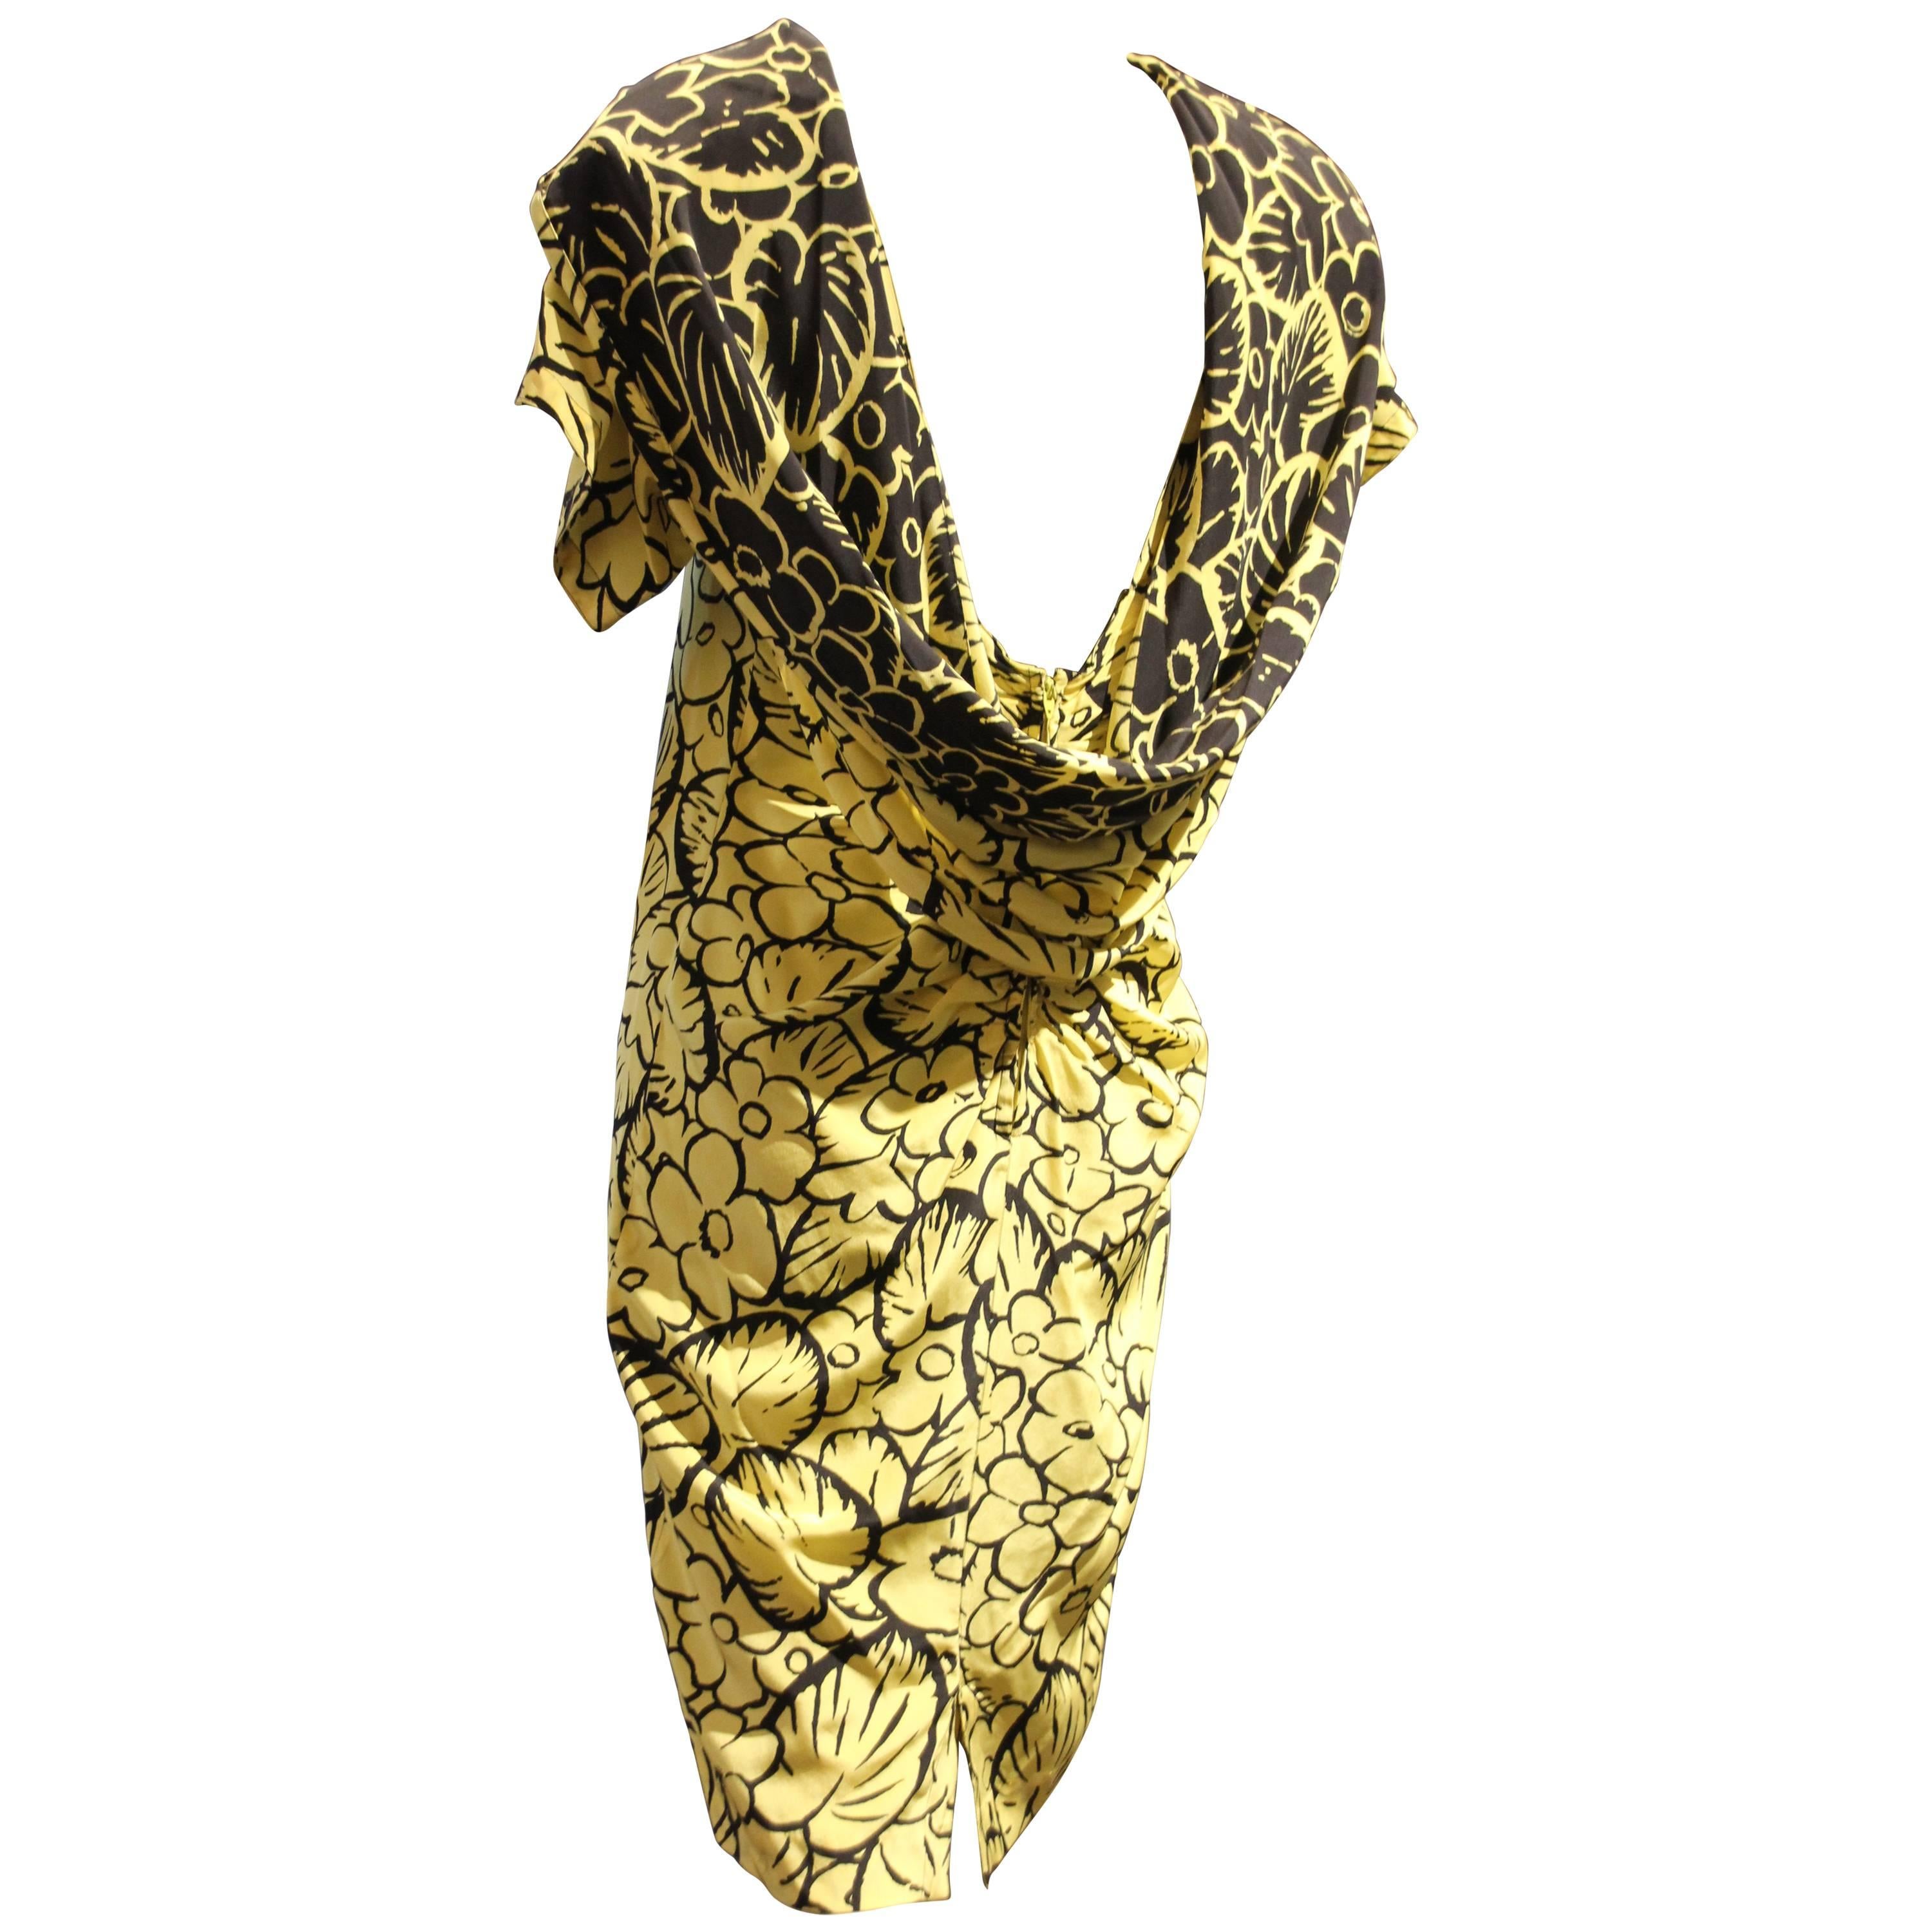 1980s Gianni Versace Yellow and Black Floral Print Silk Dress w Draped Back  For Sale